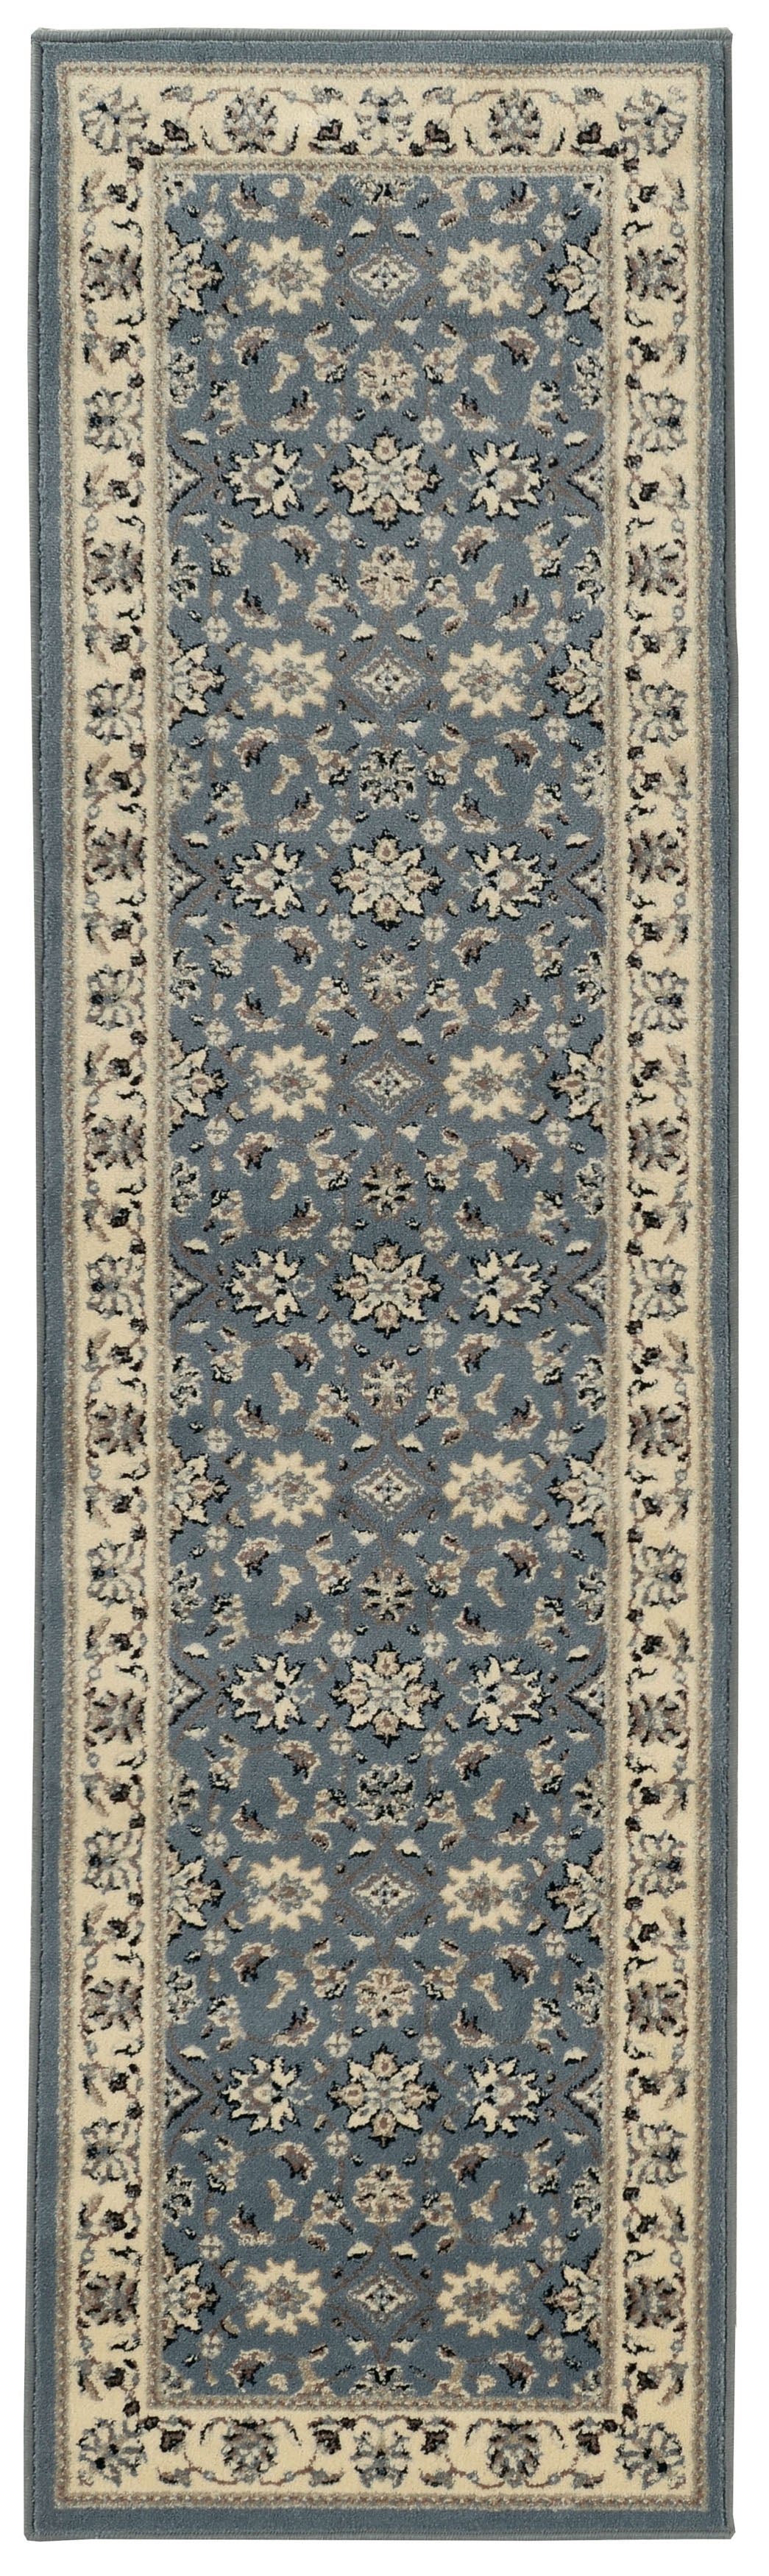 Alba 1592 Machine Made Synthetic Blend Indoor Area Rug By Radici USA